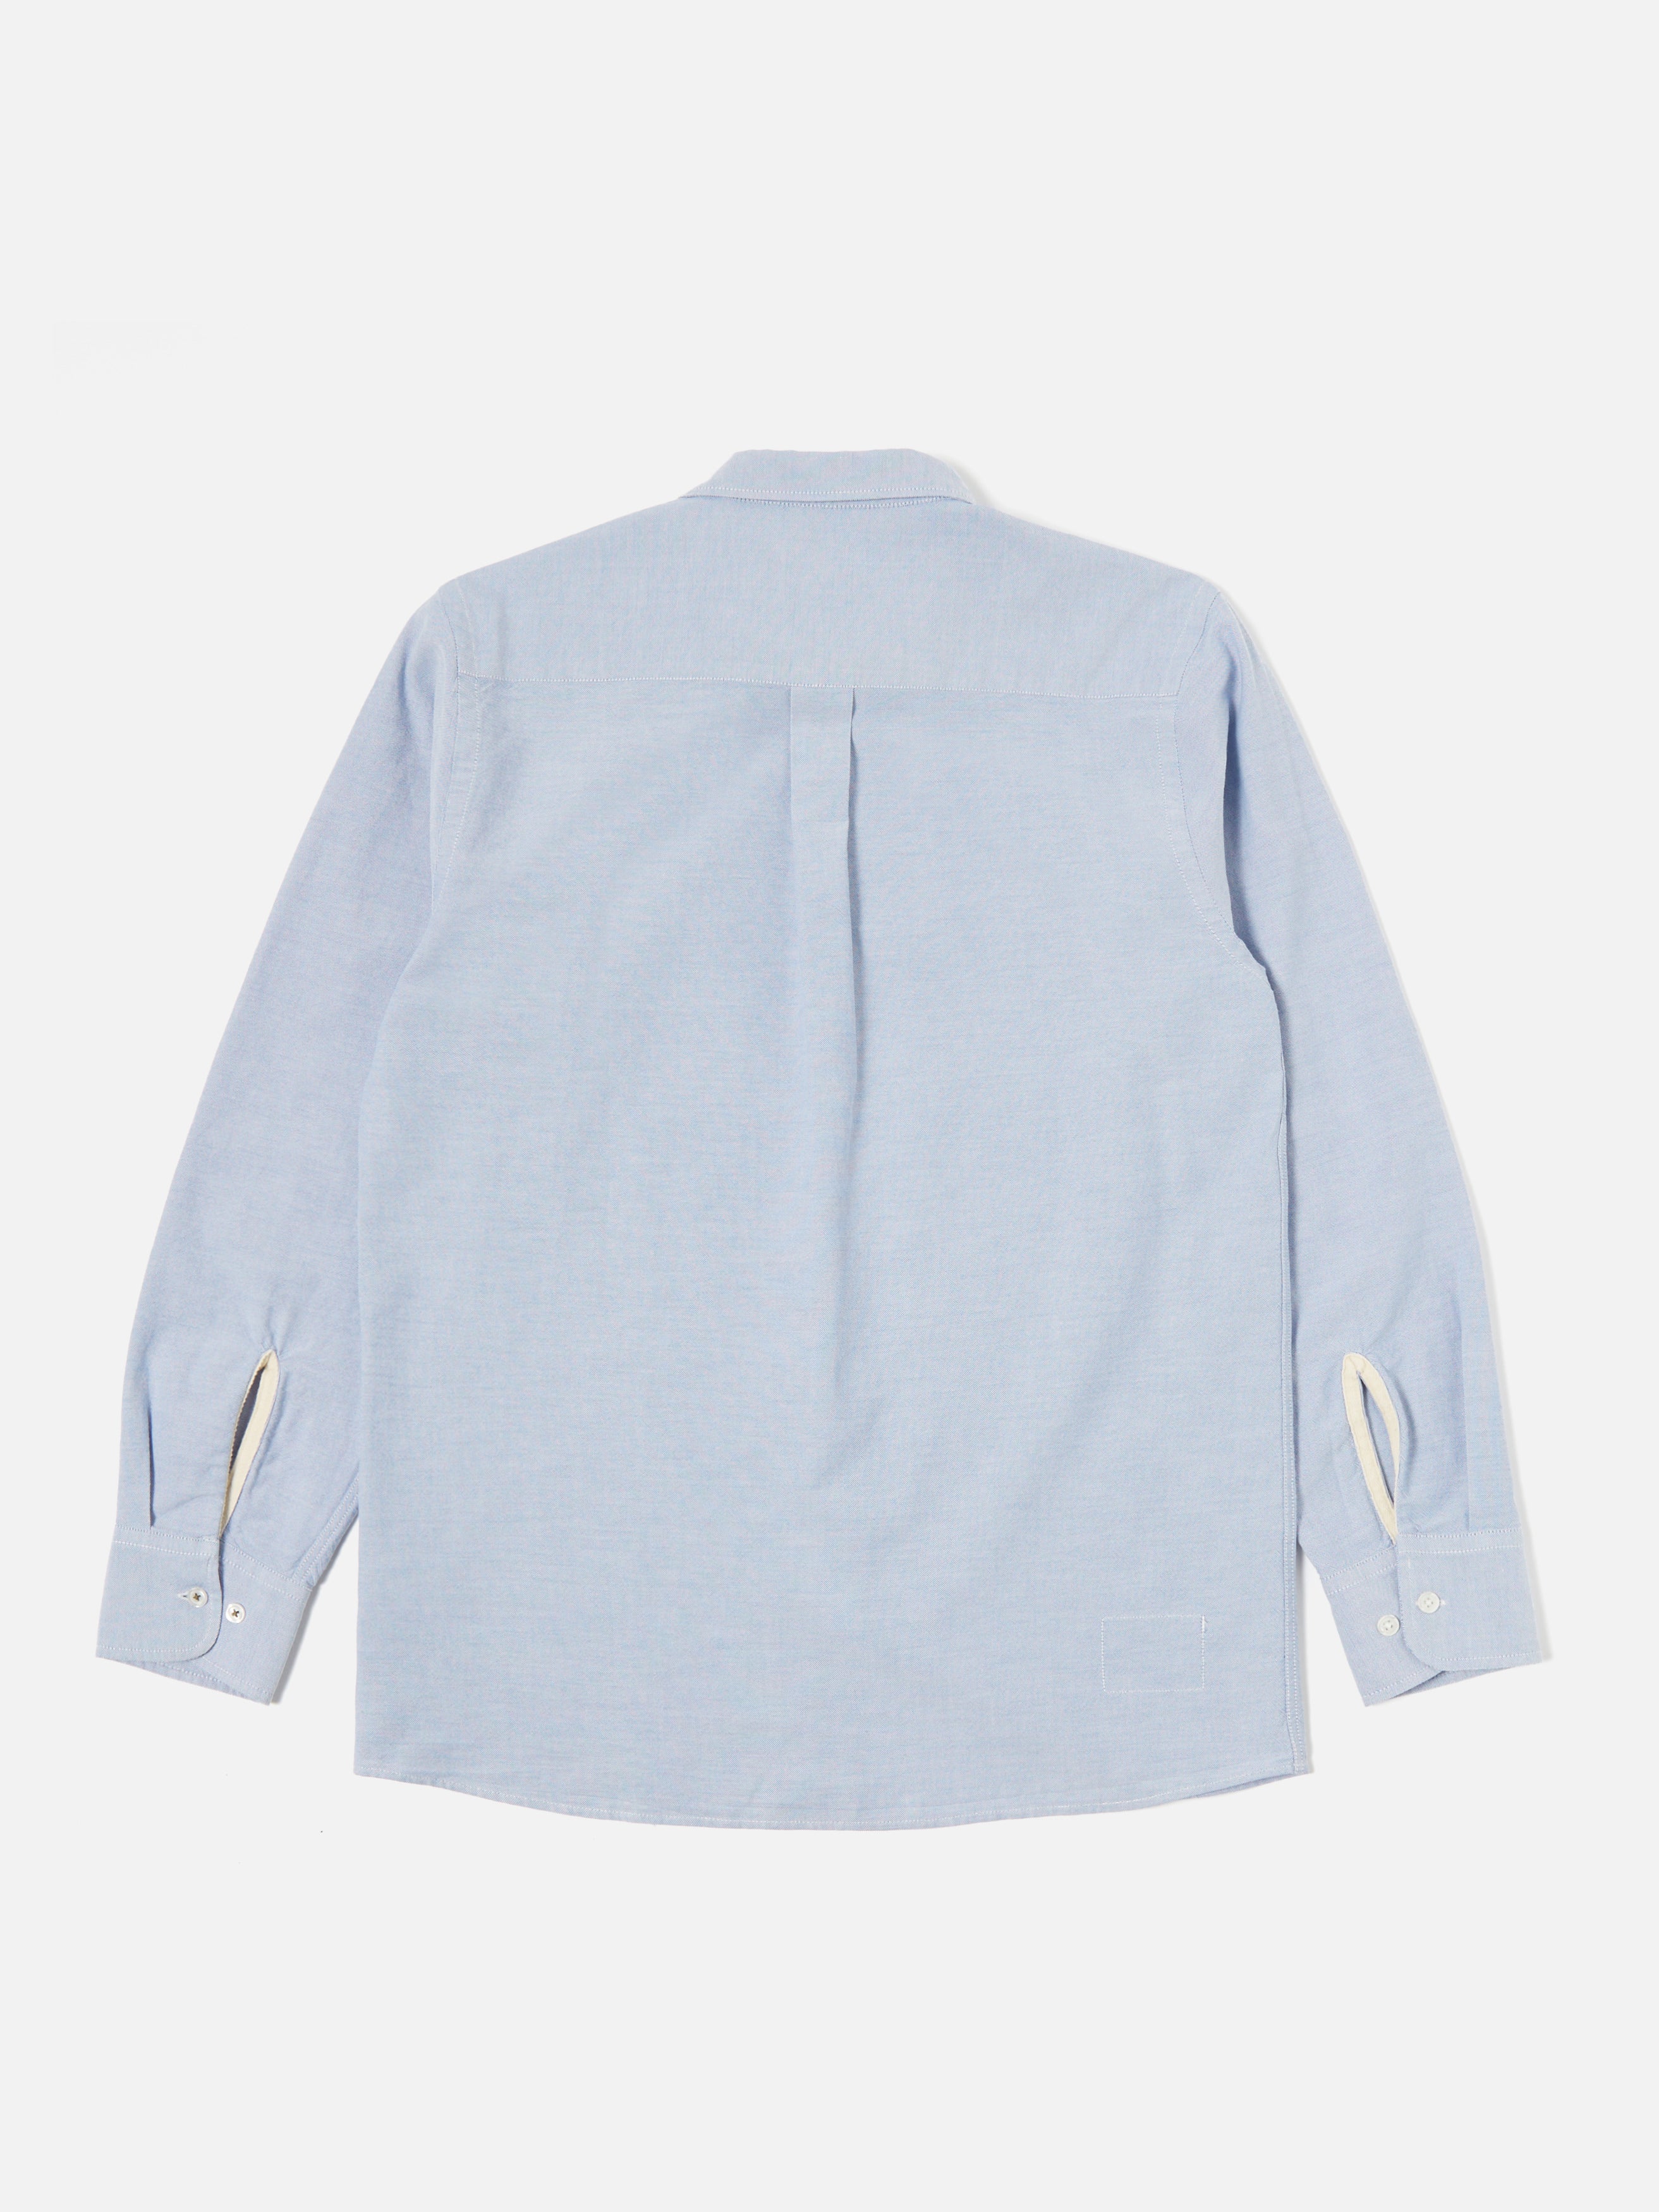 Universal Works Daybrook Shirt in Sky Oxford Cotton